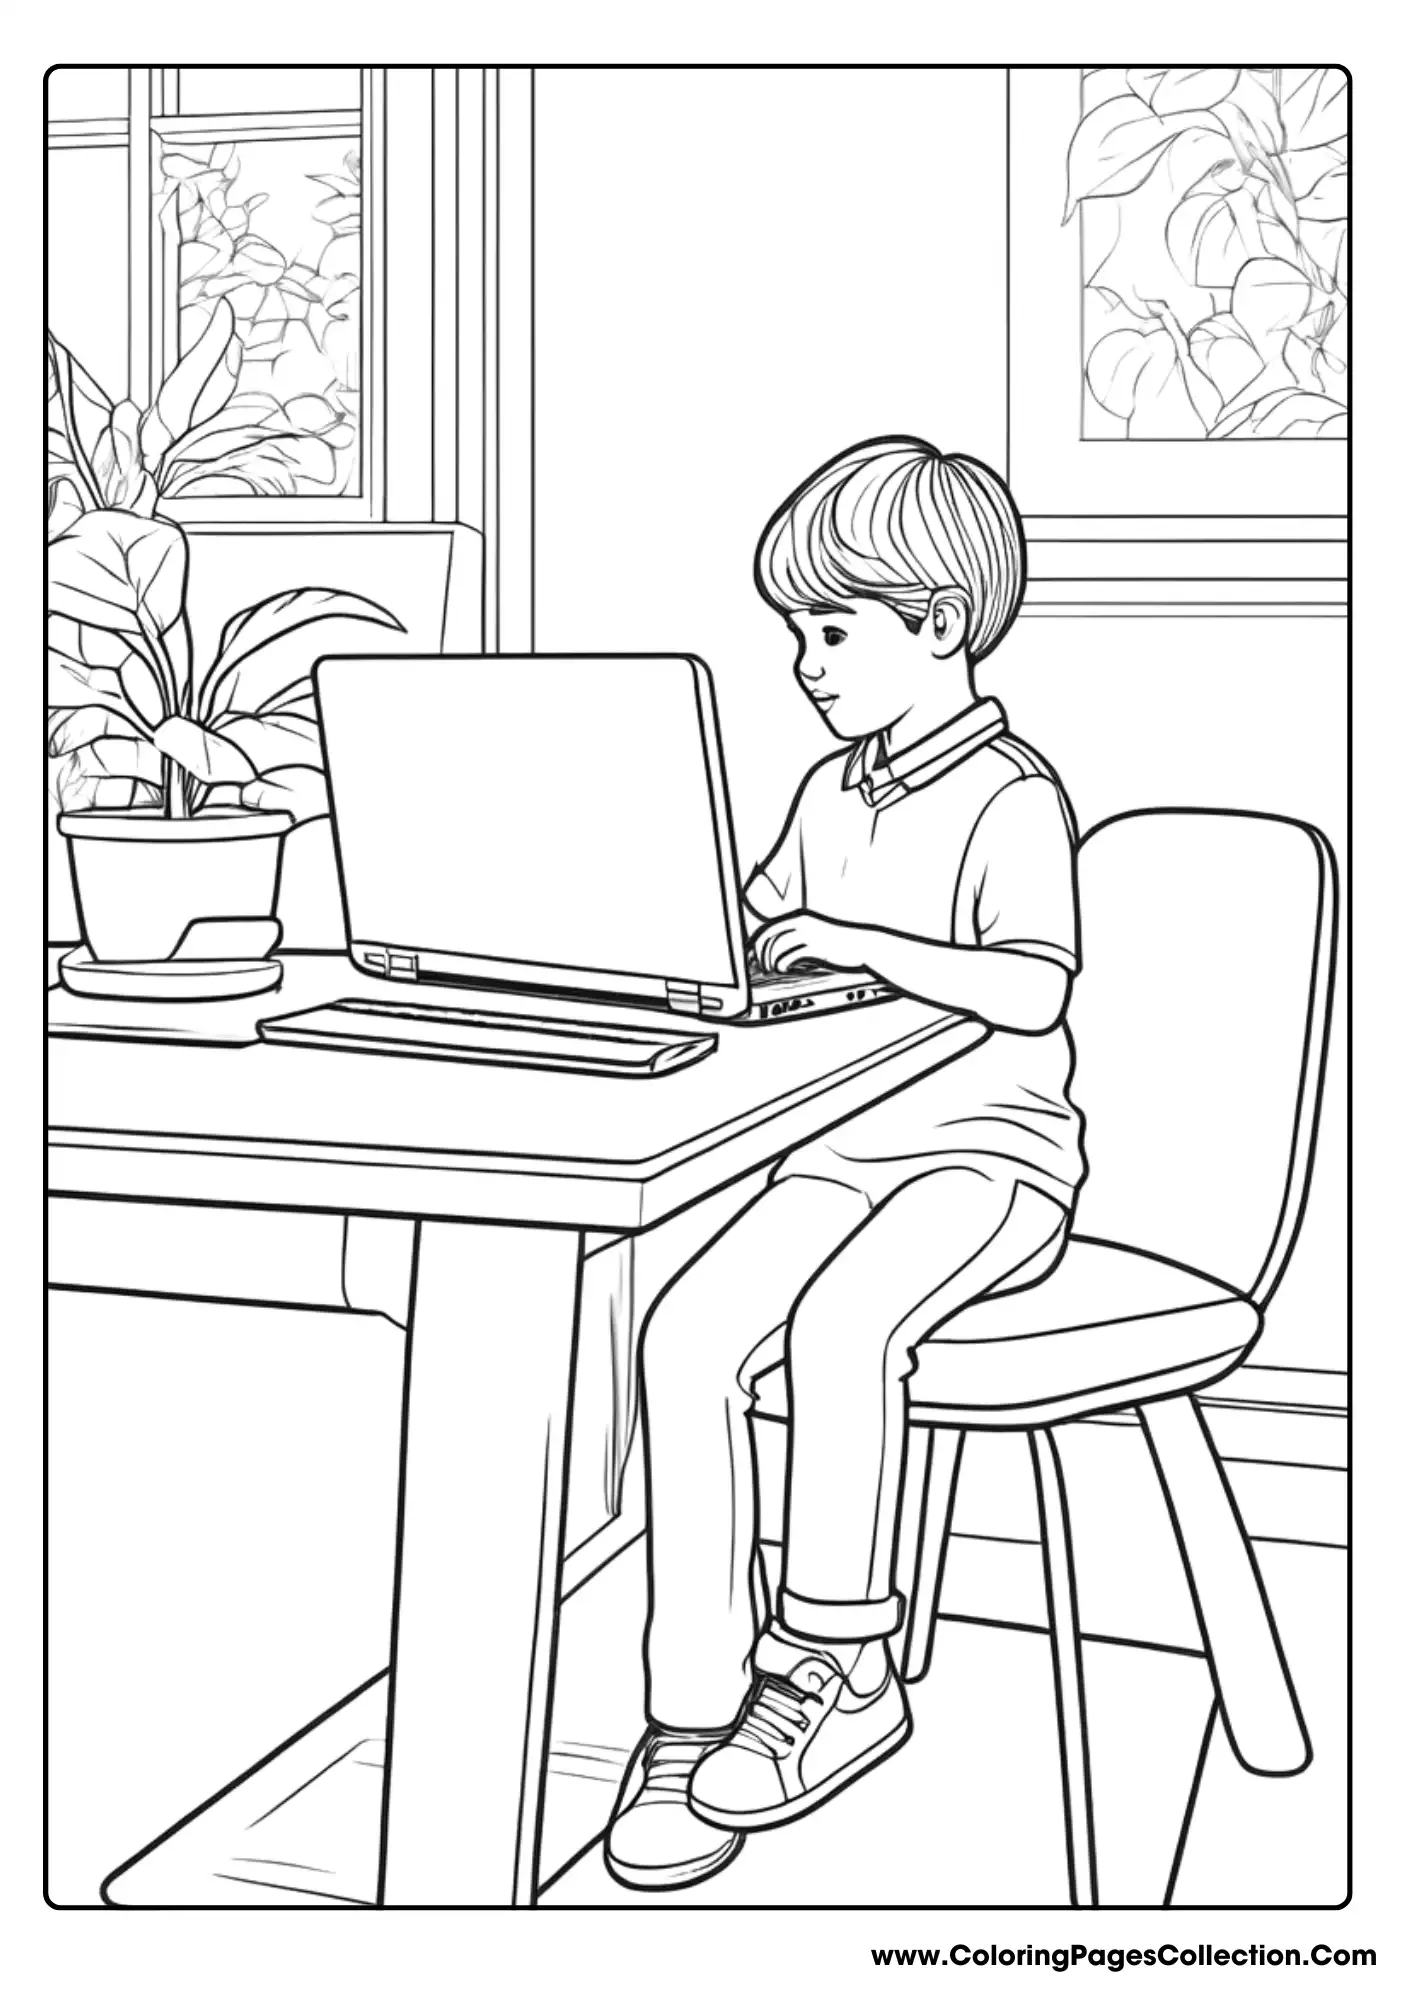 Computer coloring pages, Boy Typing something on Computer